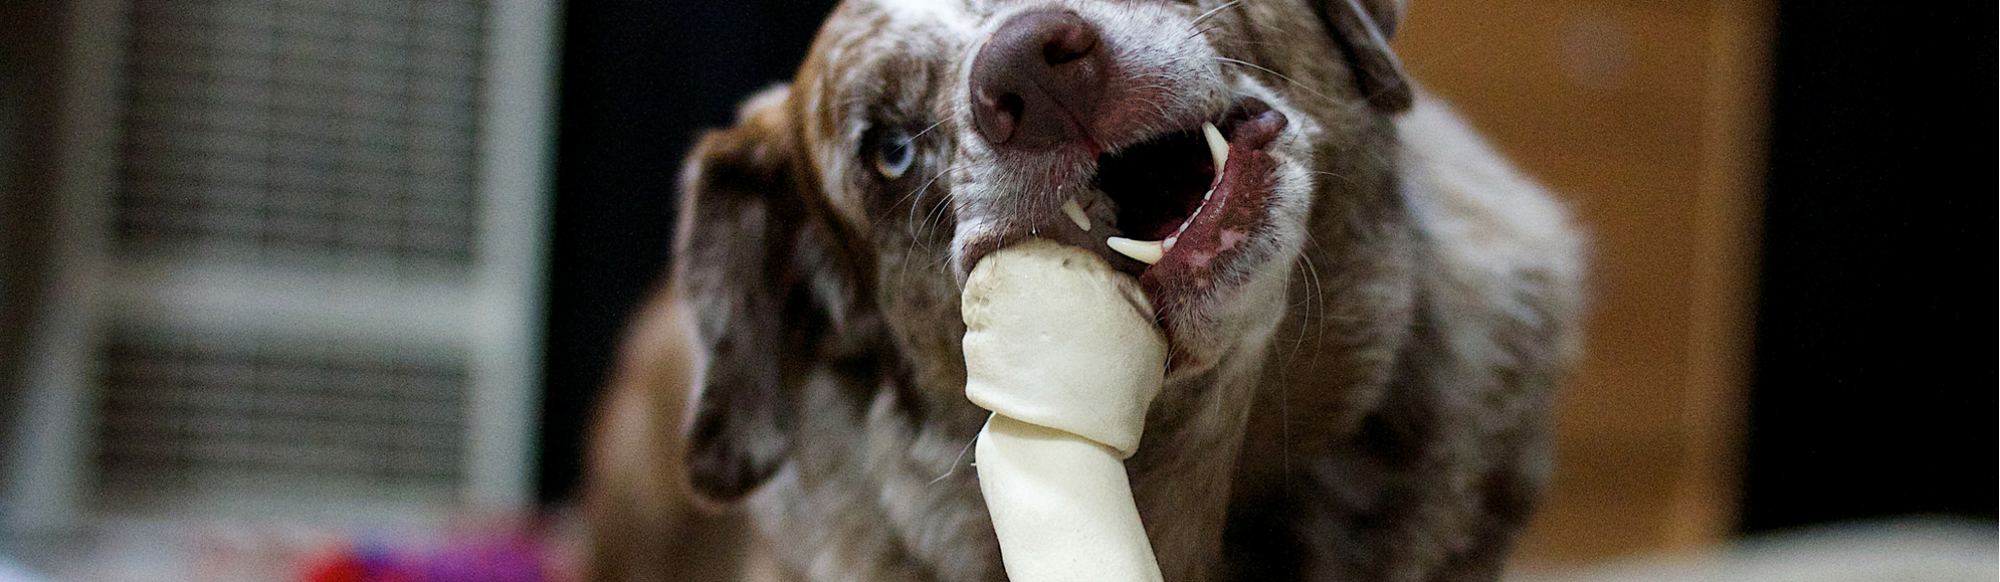 A dog chewing on a rawhide